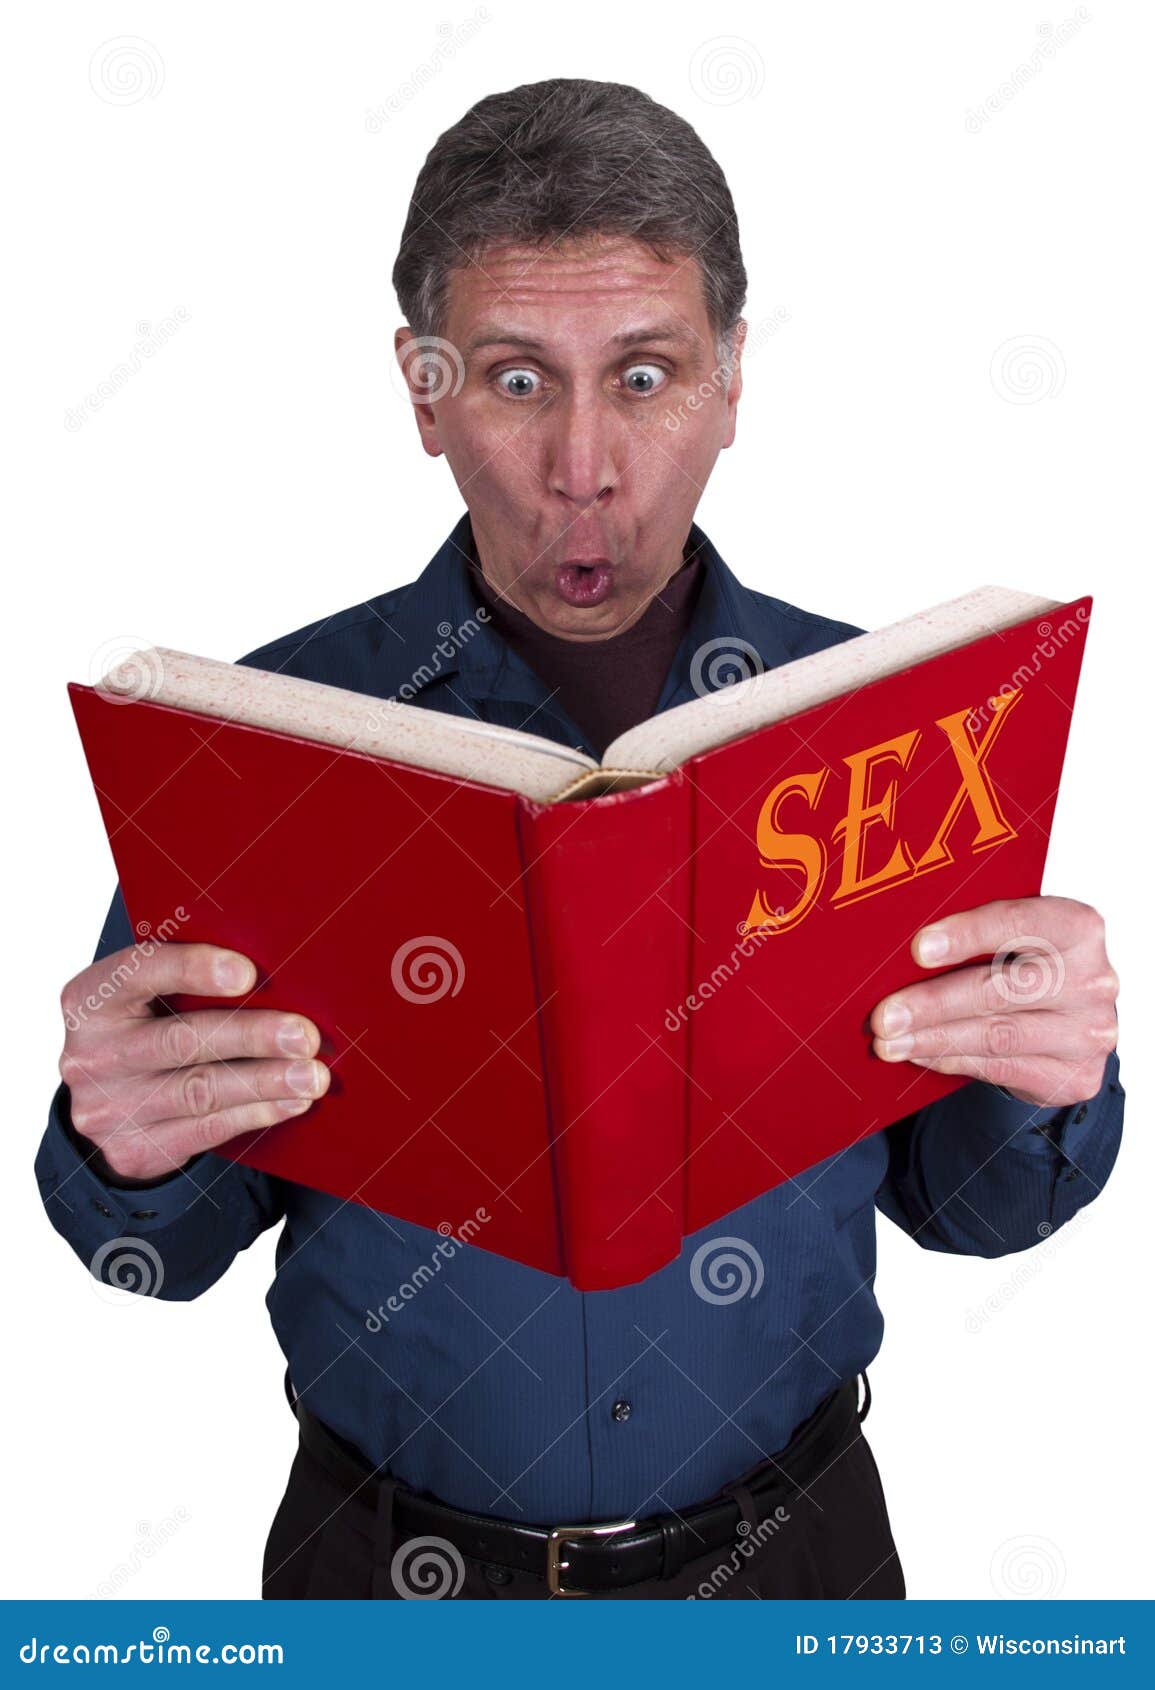 Sex Education Funny Shocked Man Reading Book Stock Image